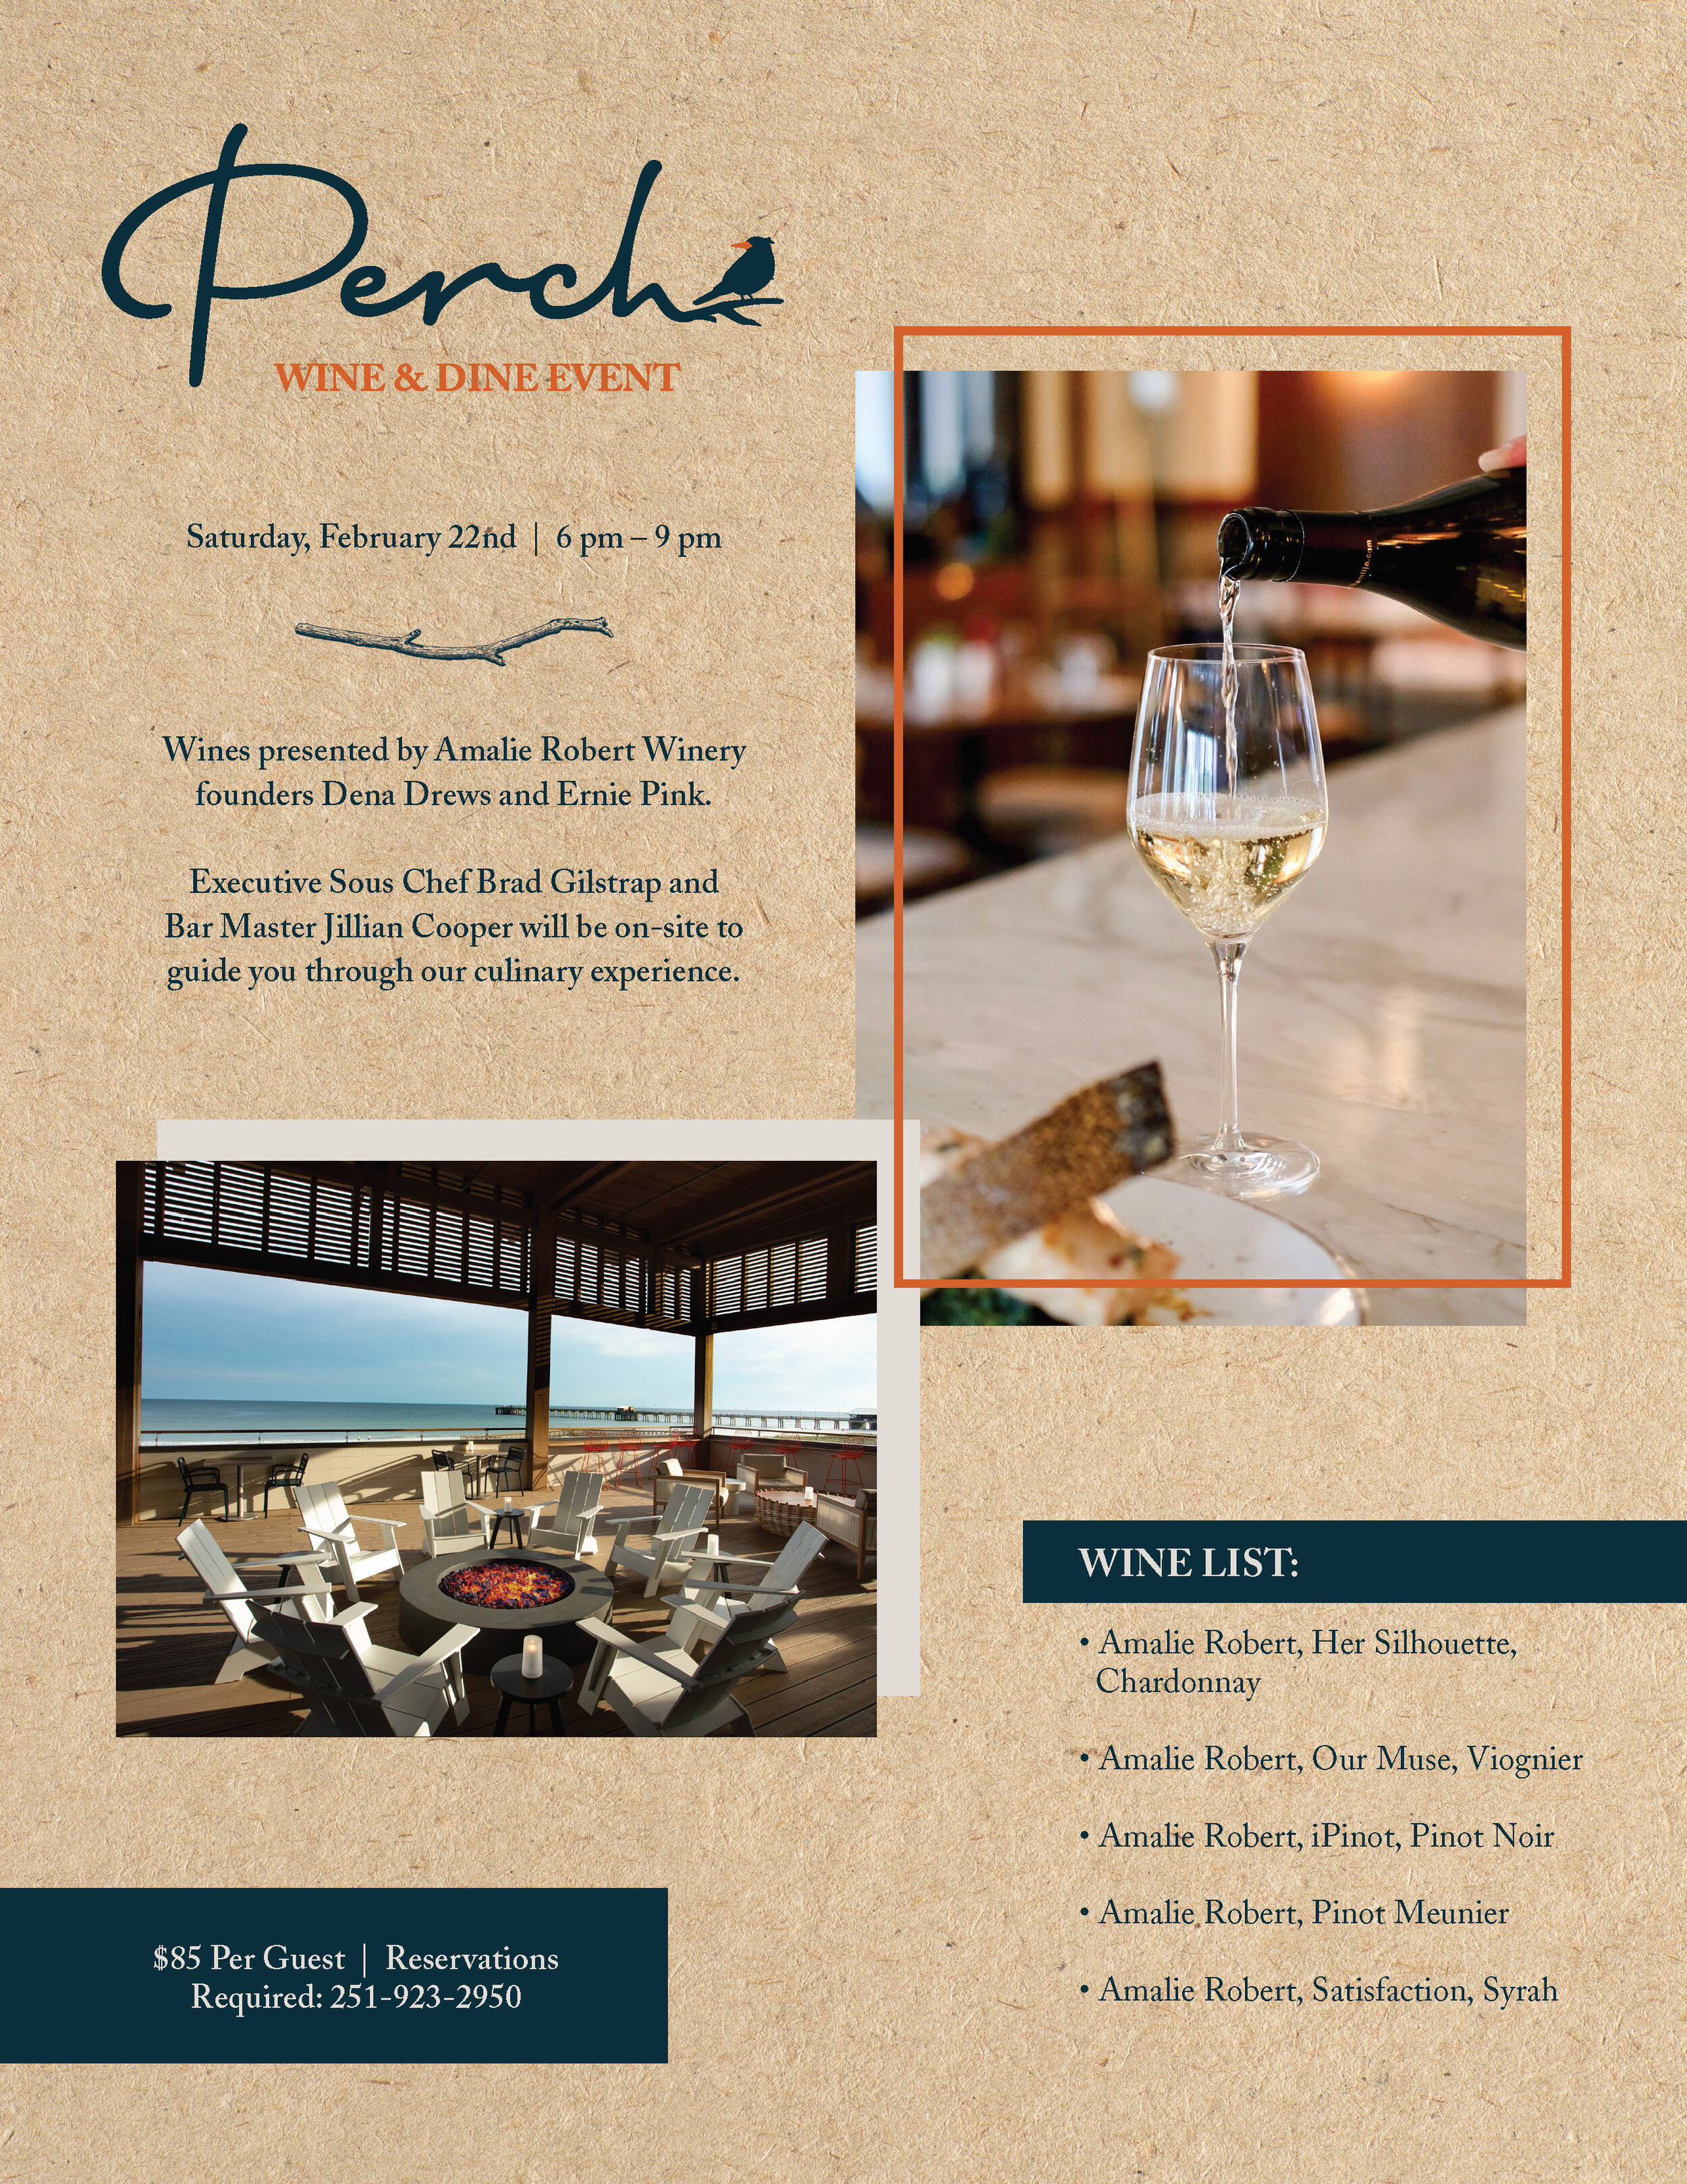 PERCH004_February Wine & Dine Flyer_R1_1_Page_1.jpg